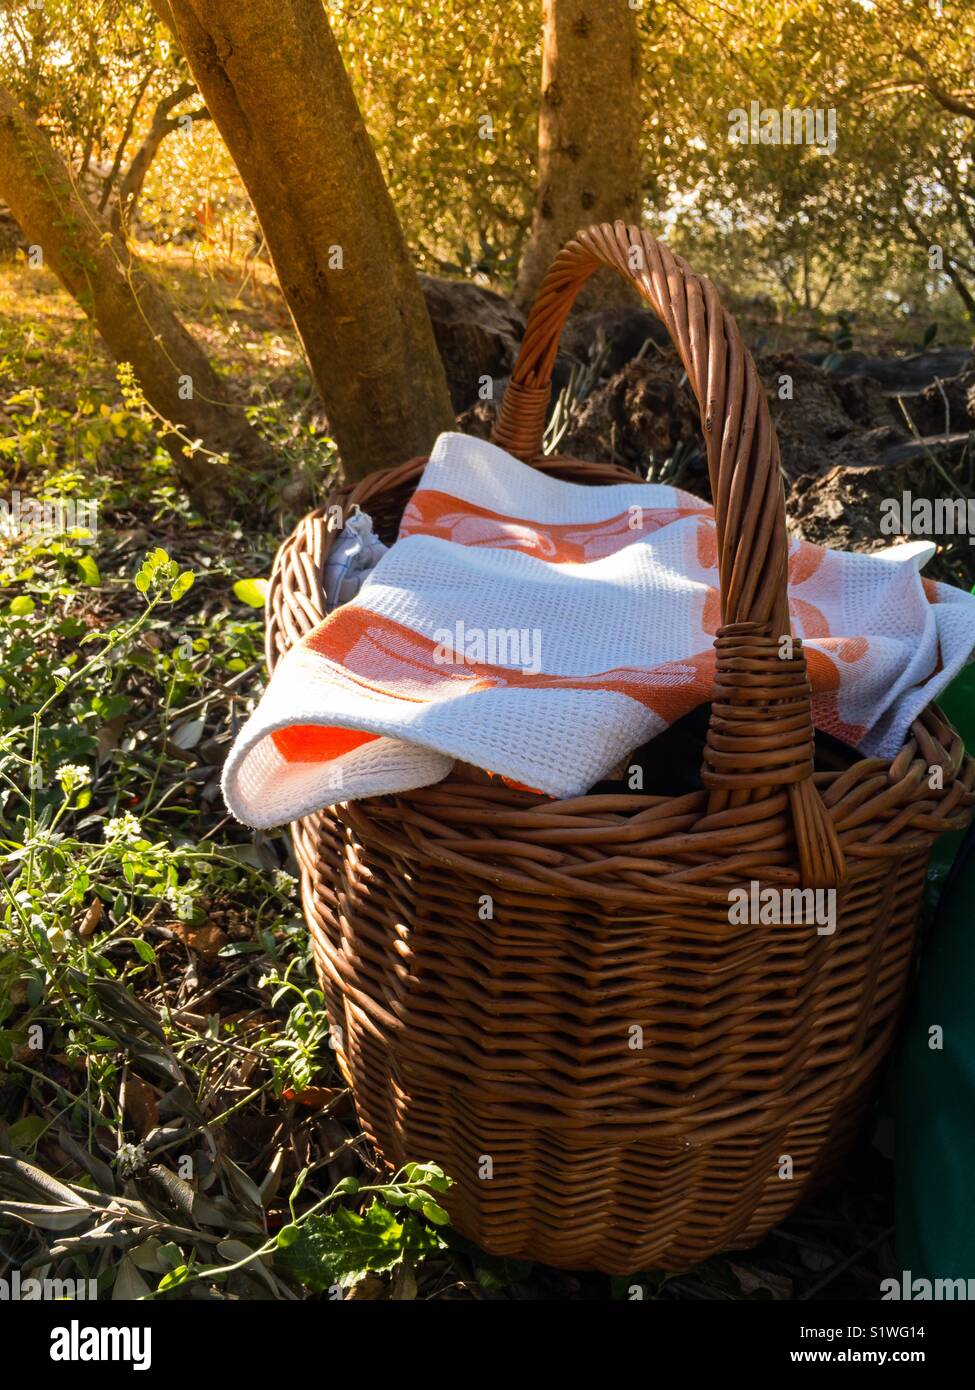 Picnic basket in nature on sunny day Stock Photo